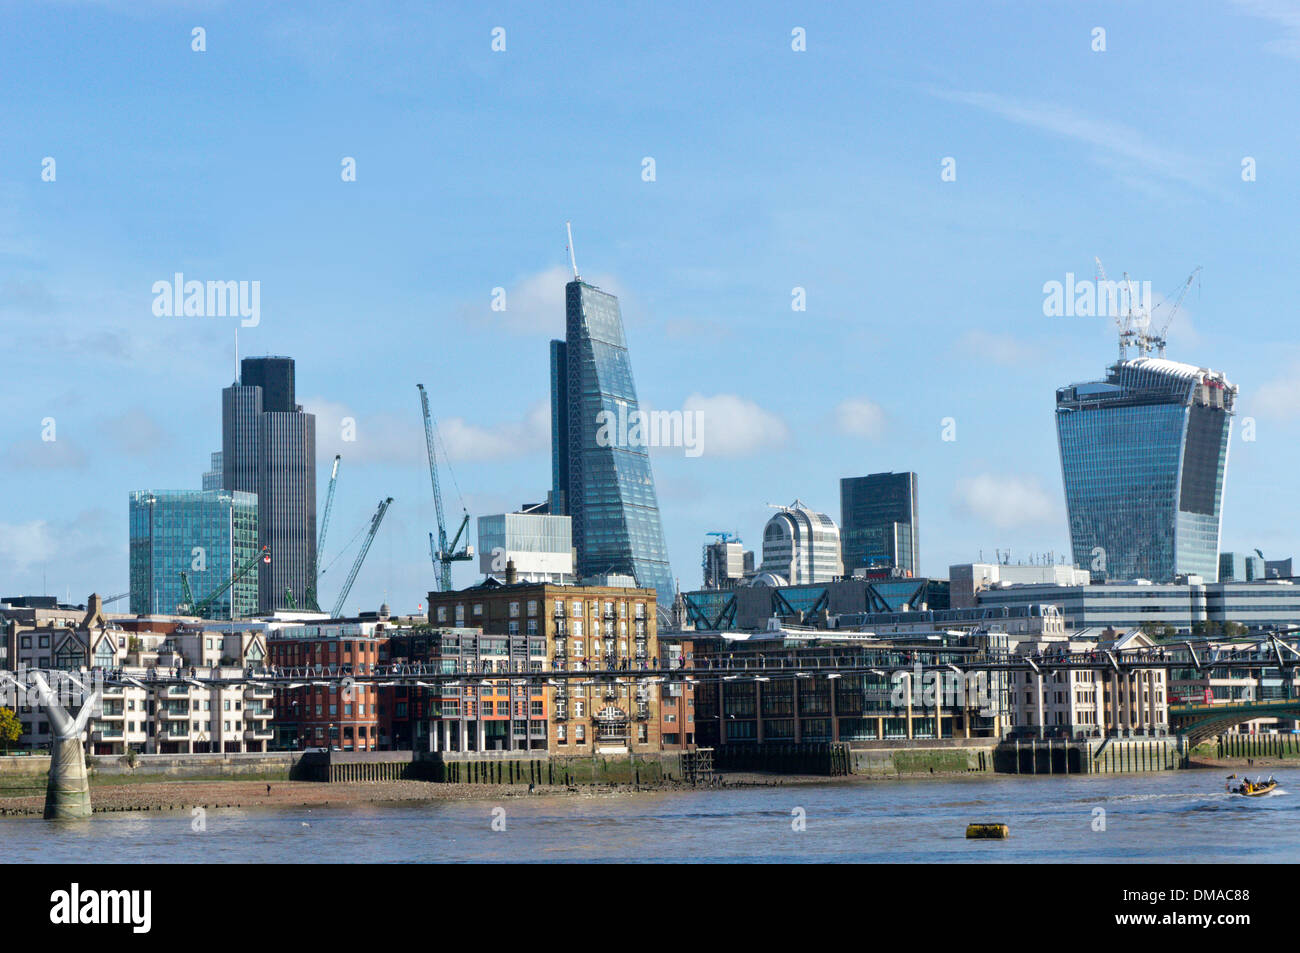 Landmark office buildings on the London City skyline seen from the south bank of the River Thames. Stock Photo